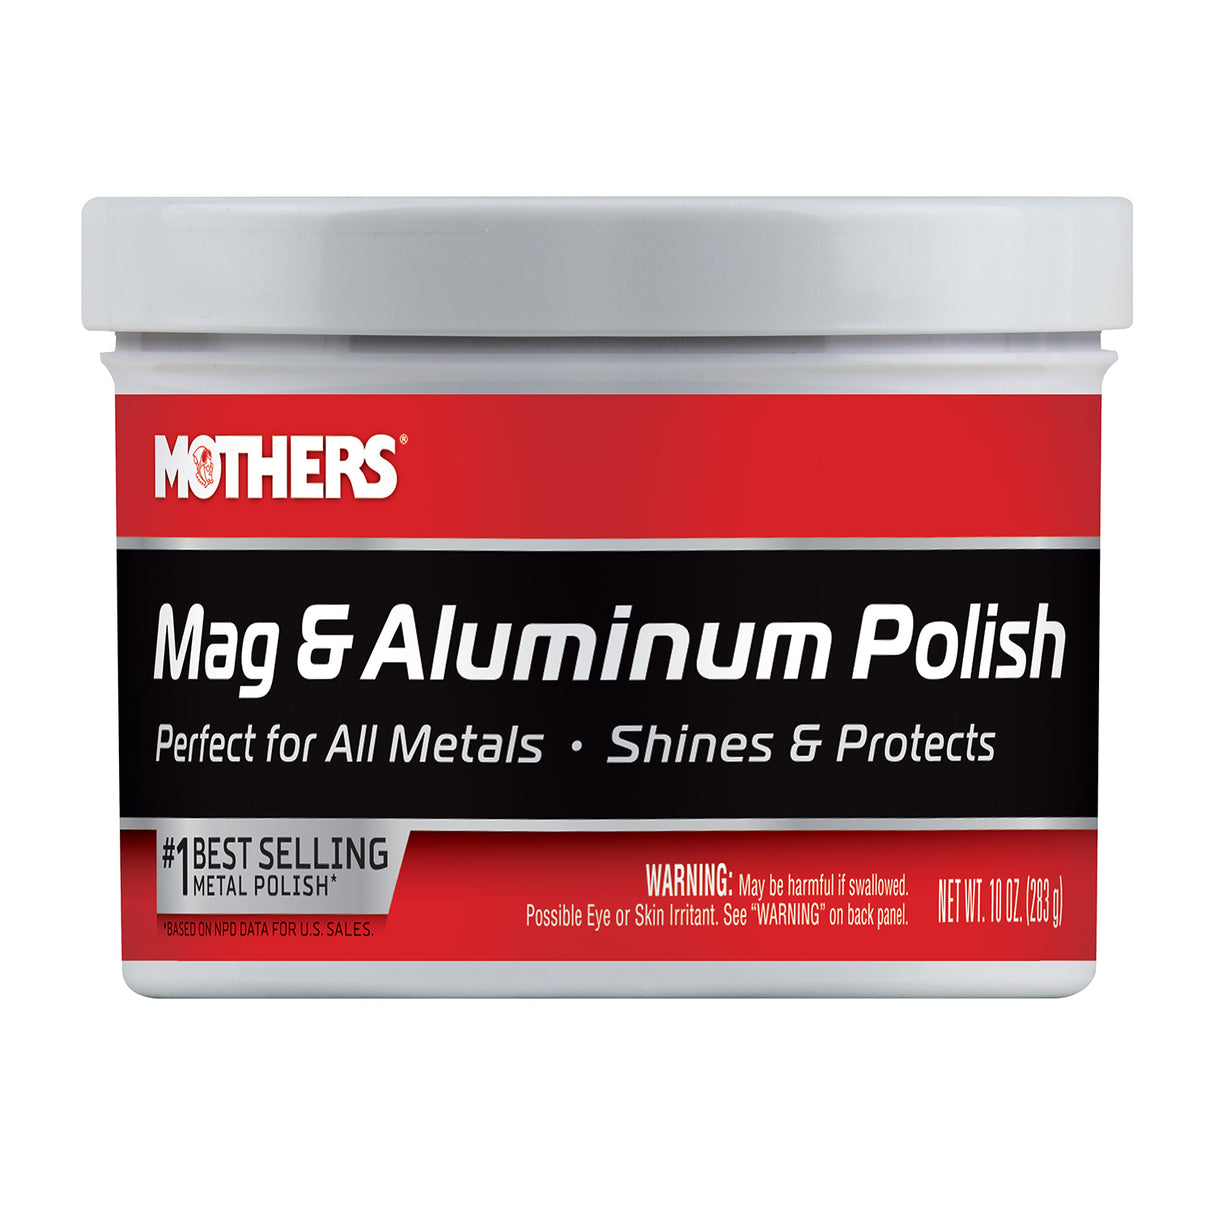 MOTHERS 05101 Mag & Aluminum Polish - Shines & Protects - Brass - 10 oz.